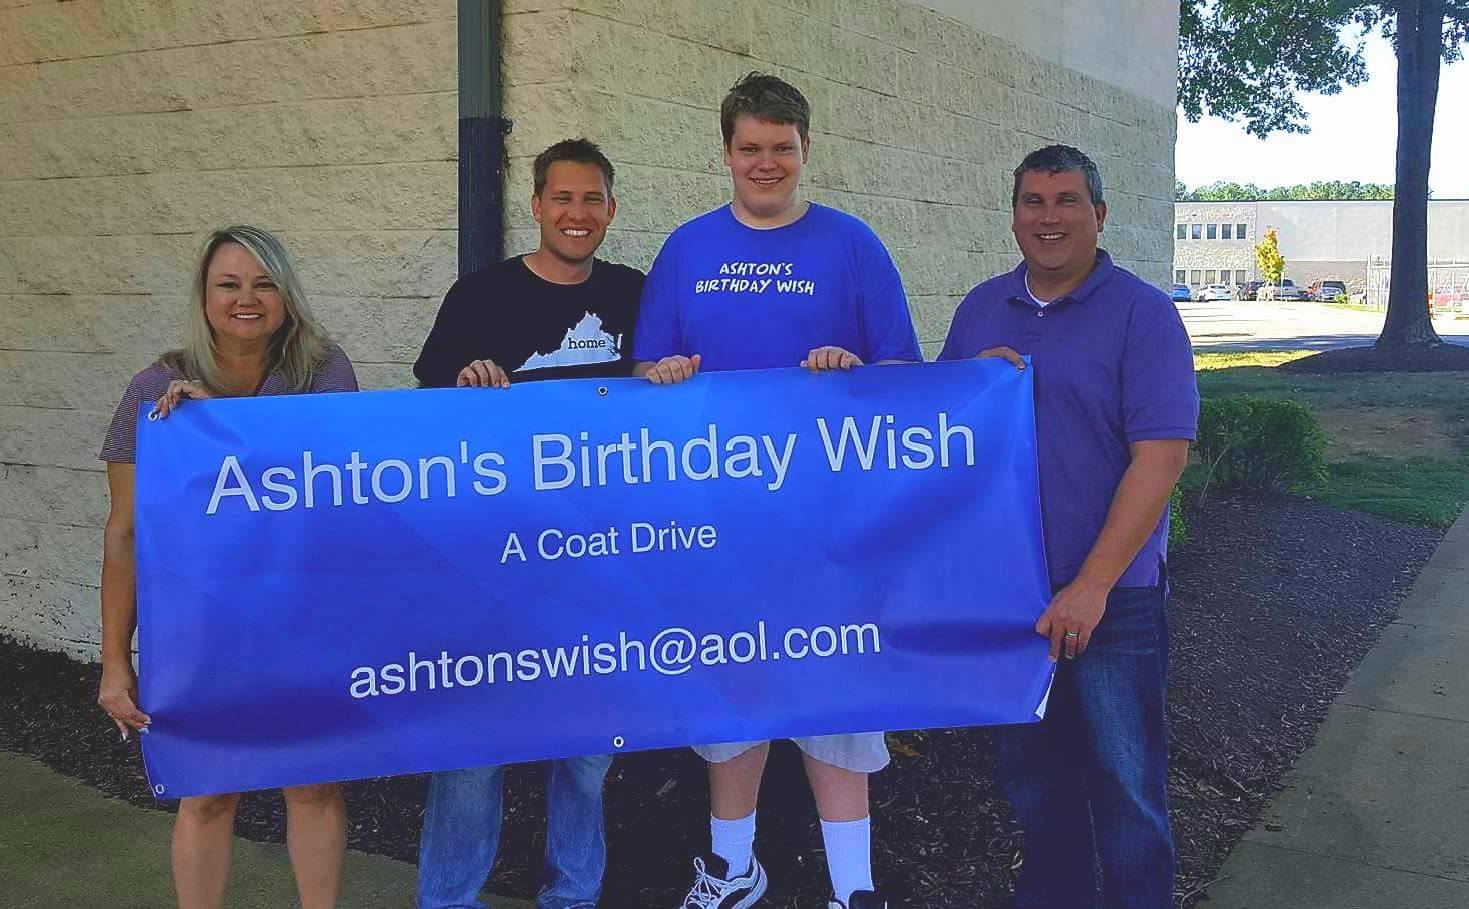 Support an Amazing Child’s Wish for All Local Children to Have Coats This Winter